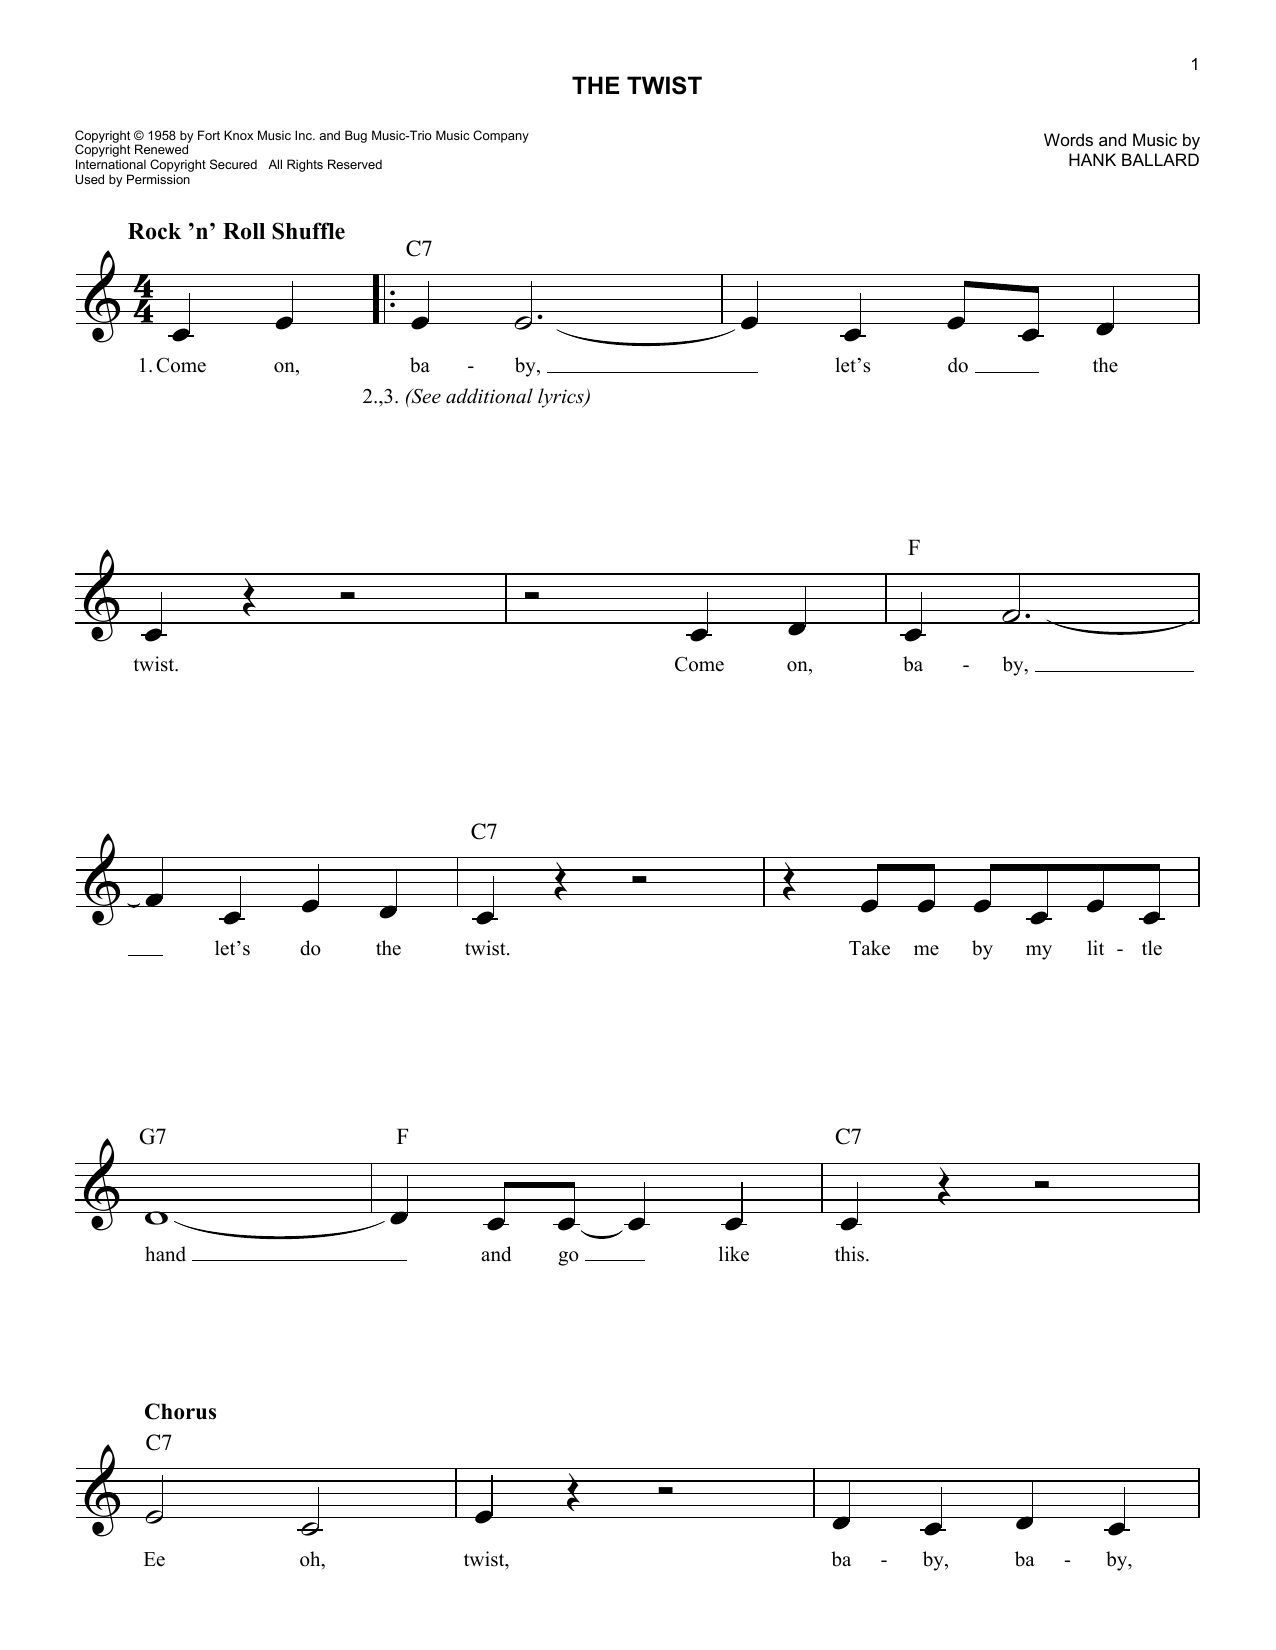 Download Chubby Checker The Twist Sheet Music